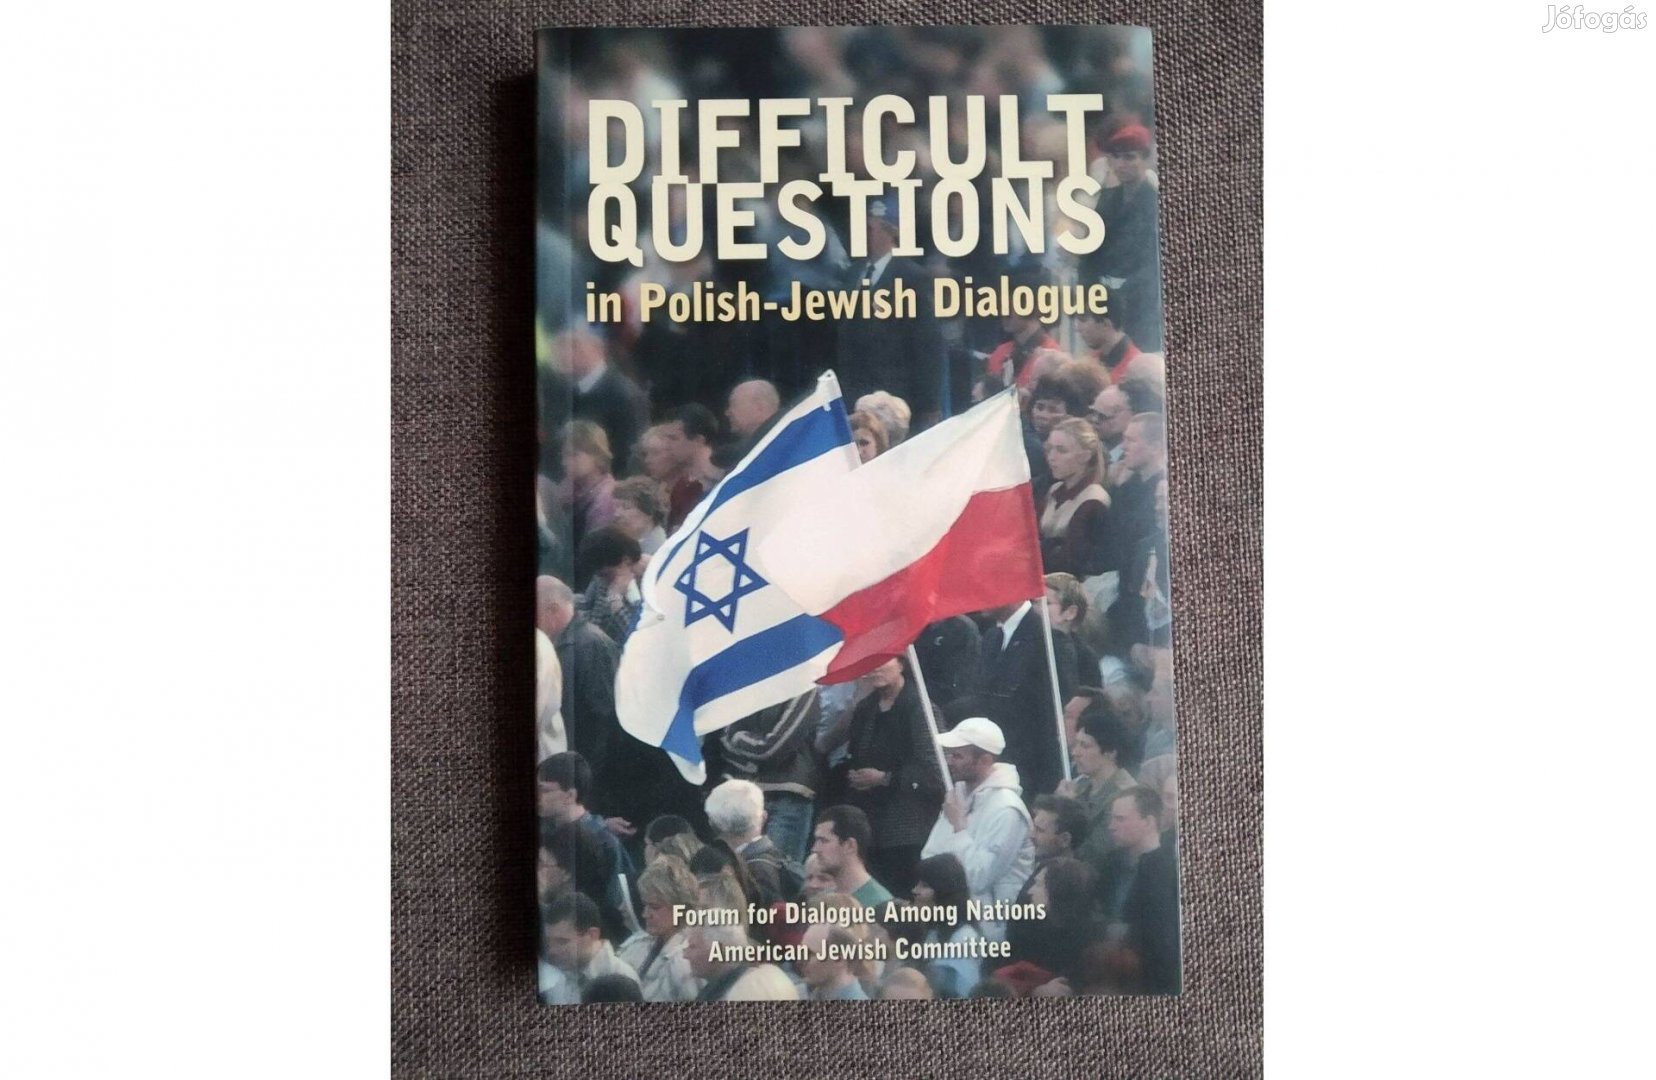 Difficult questions in Polish-Jewish Dialogue